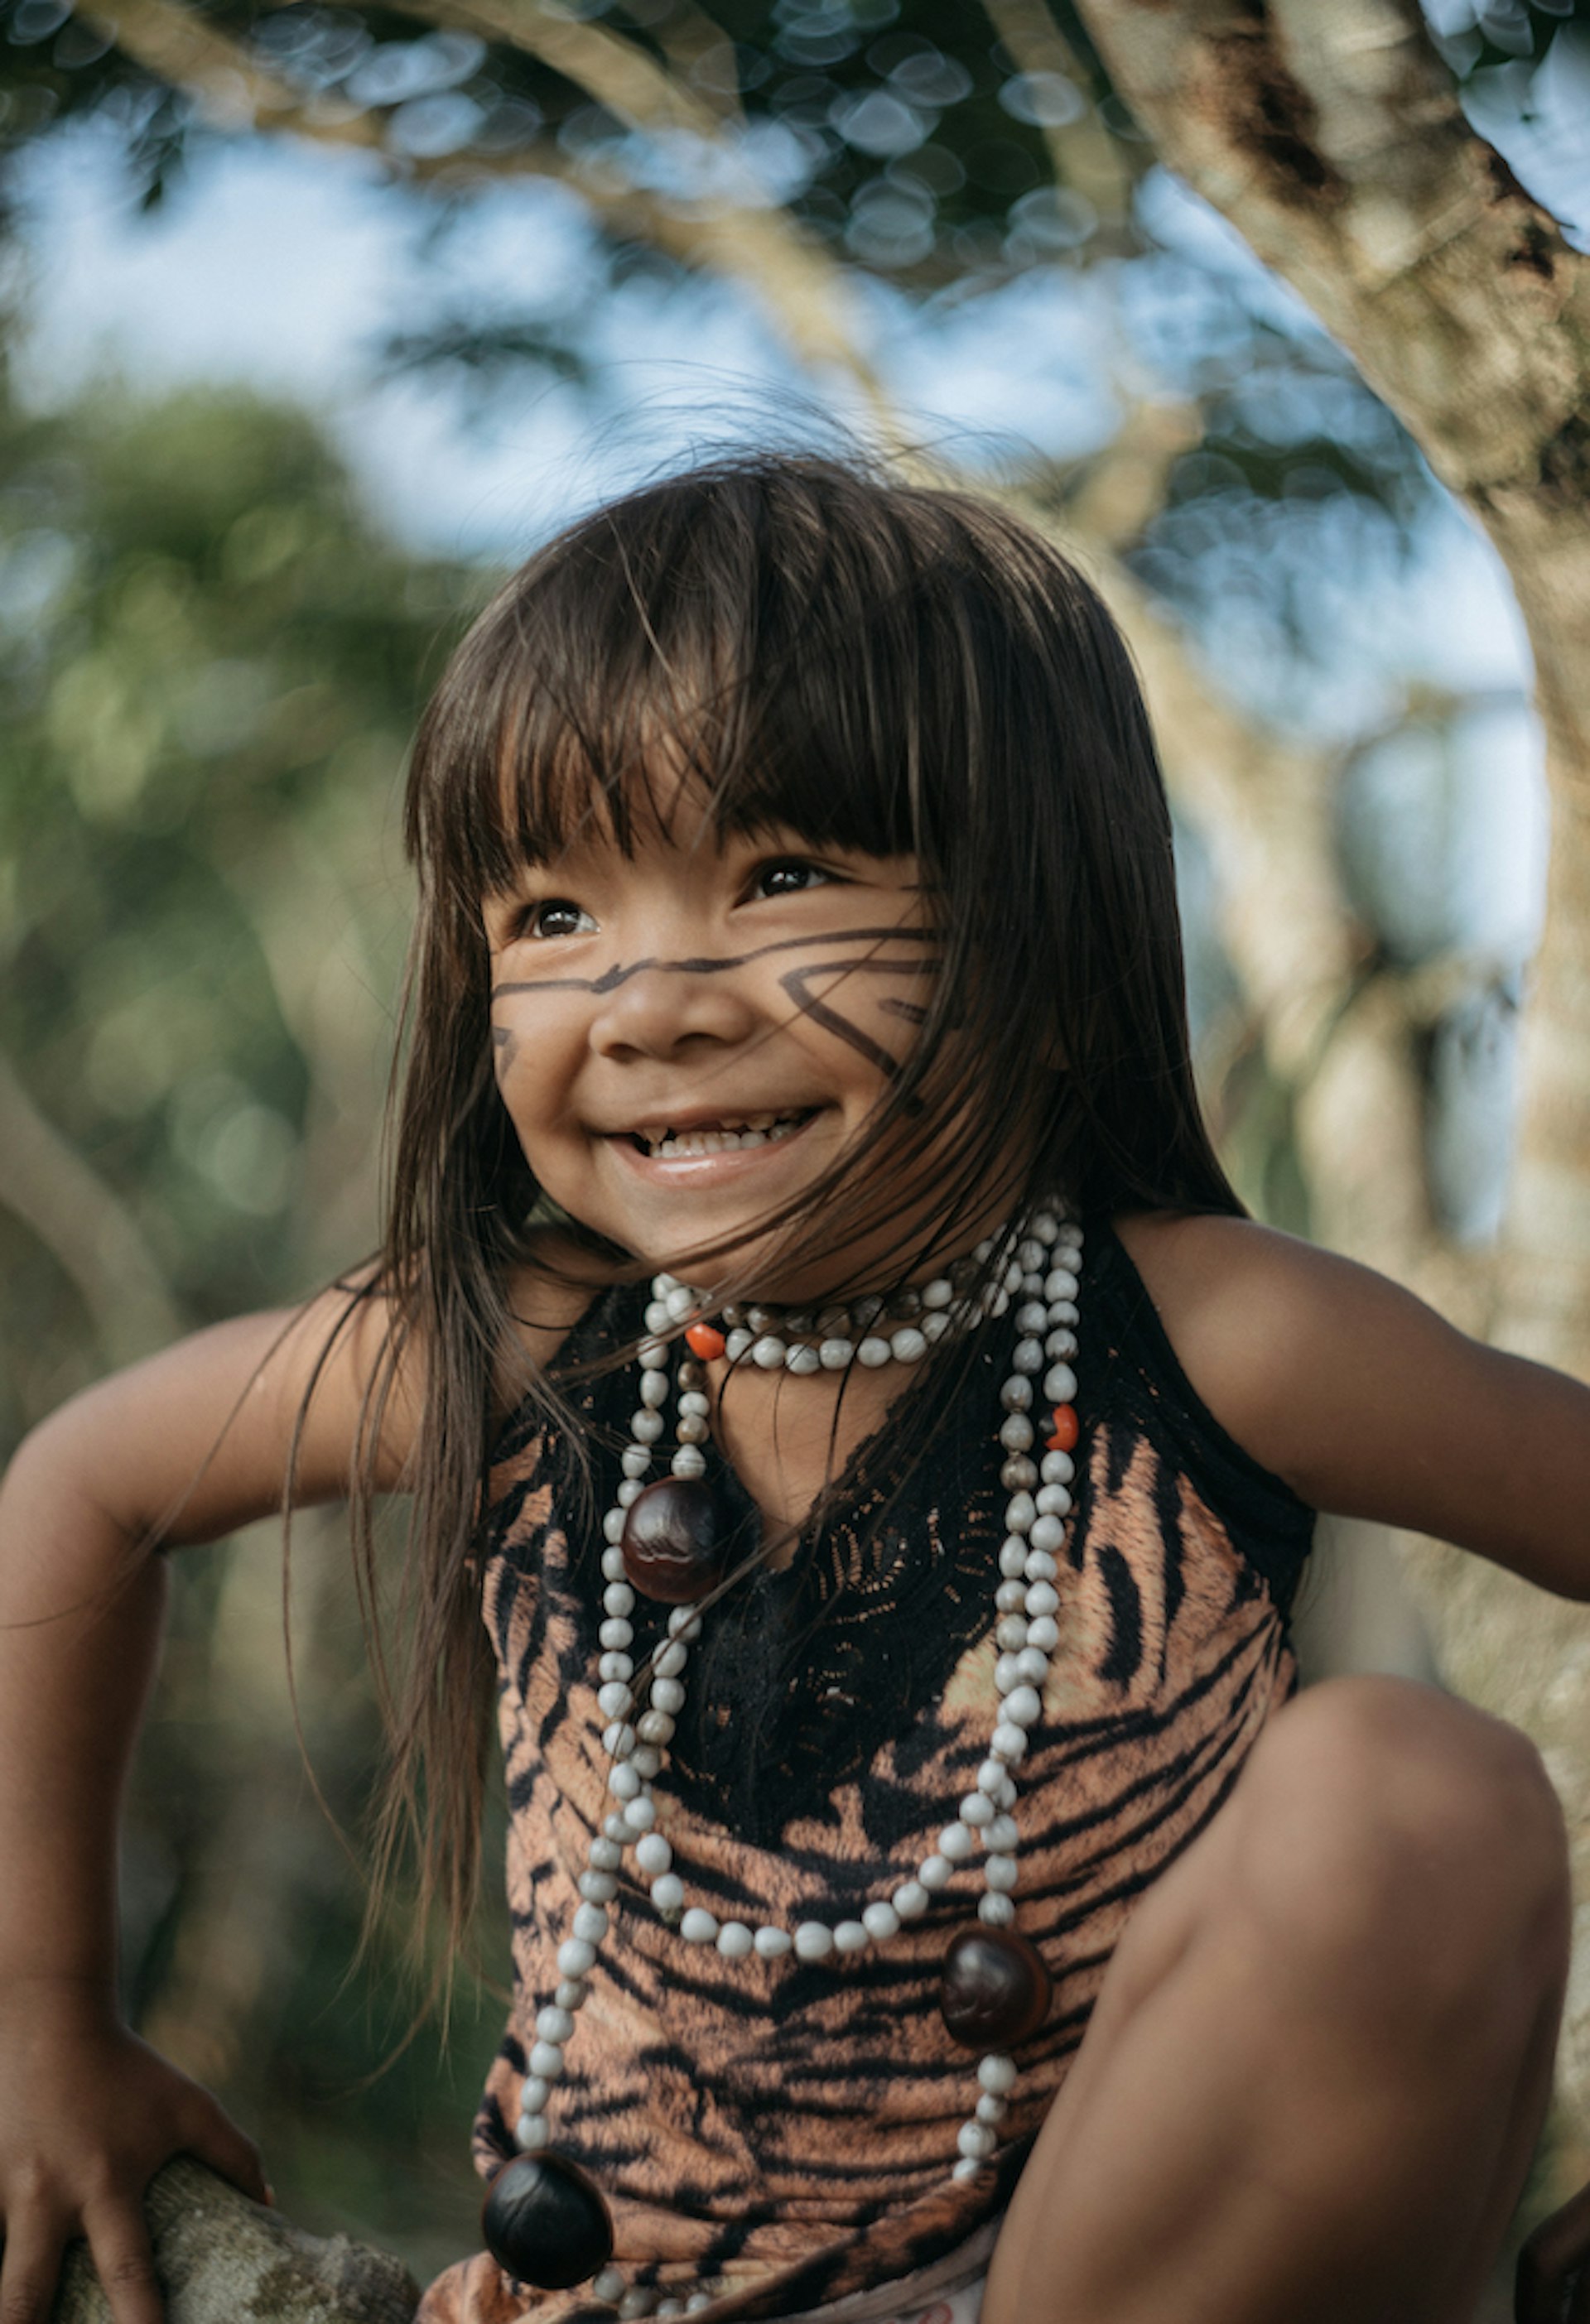 A young indigenous brazilian child wearing traditional clothing with facepaint 